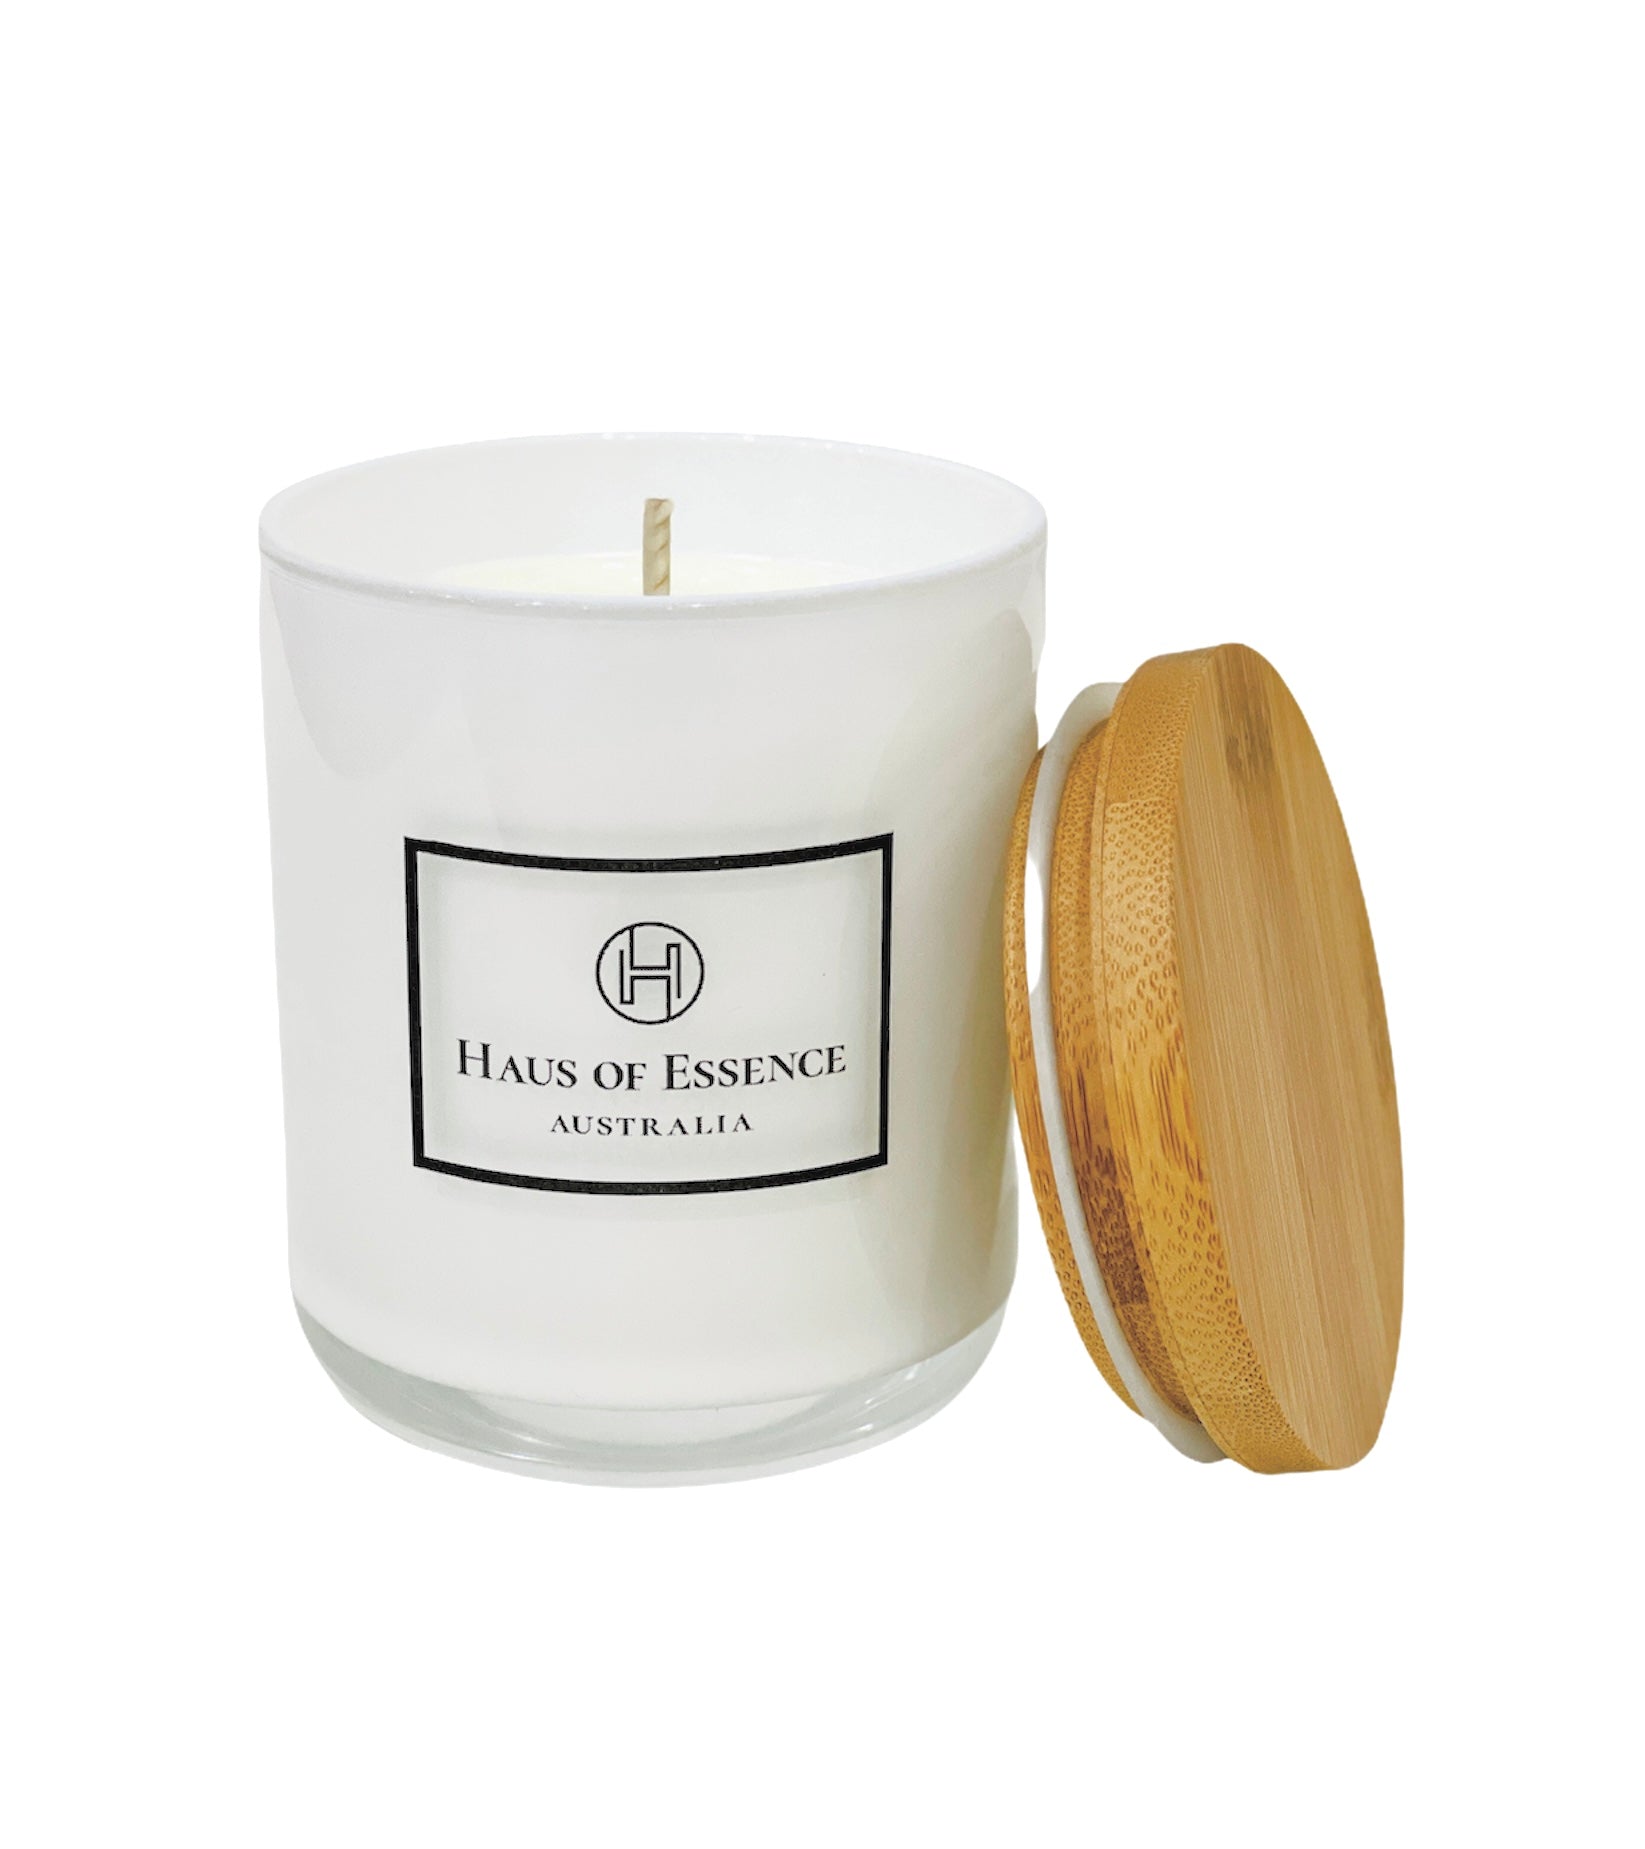 Signature Candle - Chanel No.5 Type – Haus of Essence